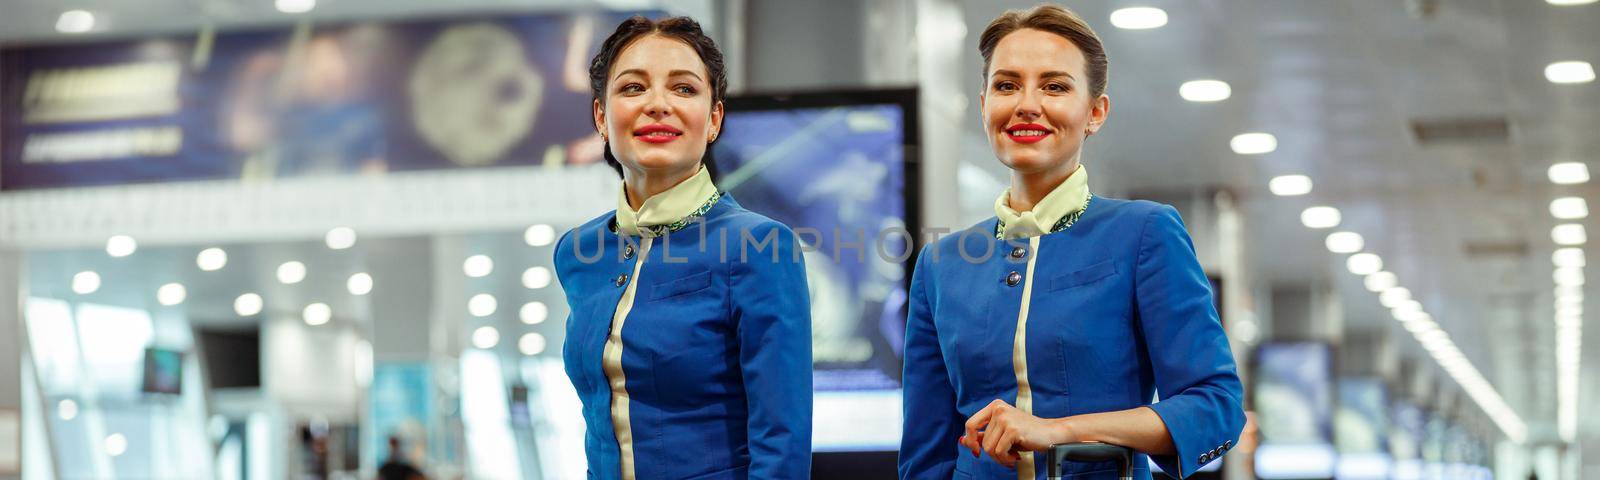 Smiling female flight attendants in aviation air hostess uniform carrying travel bags at airport